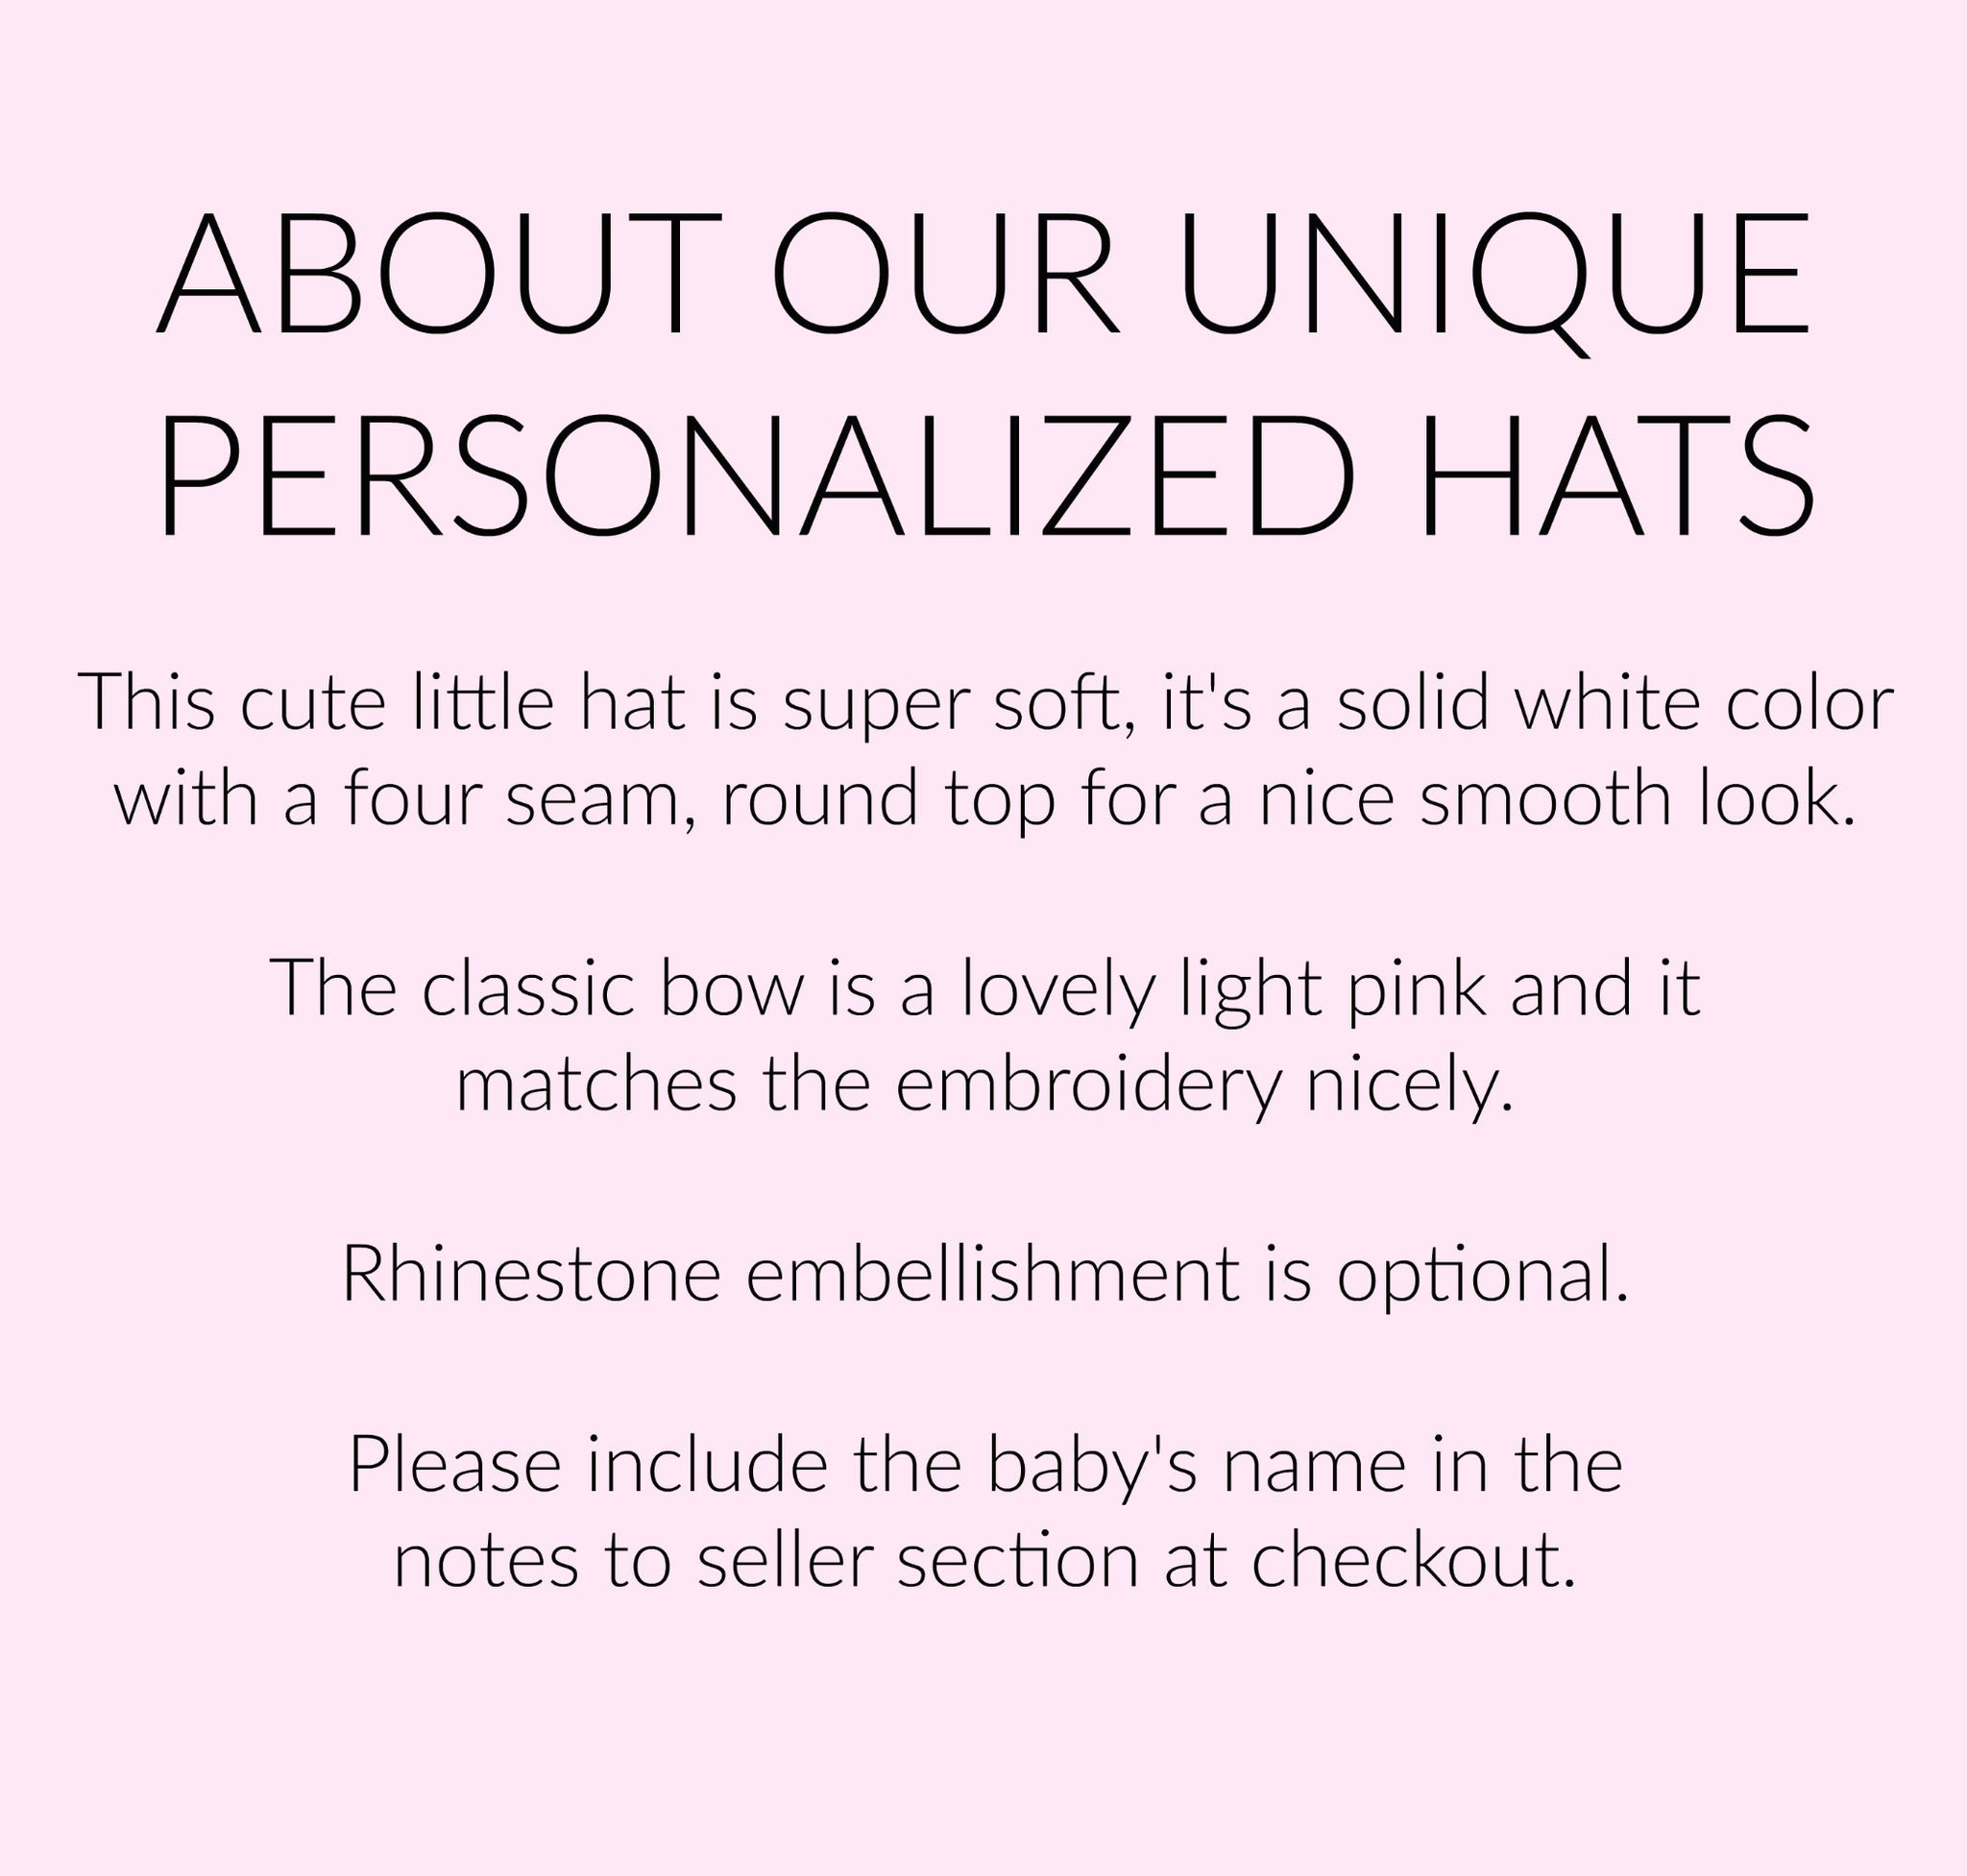 Girls Personalized Hospital Hat